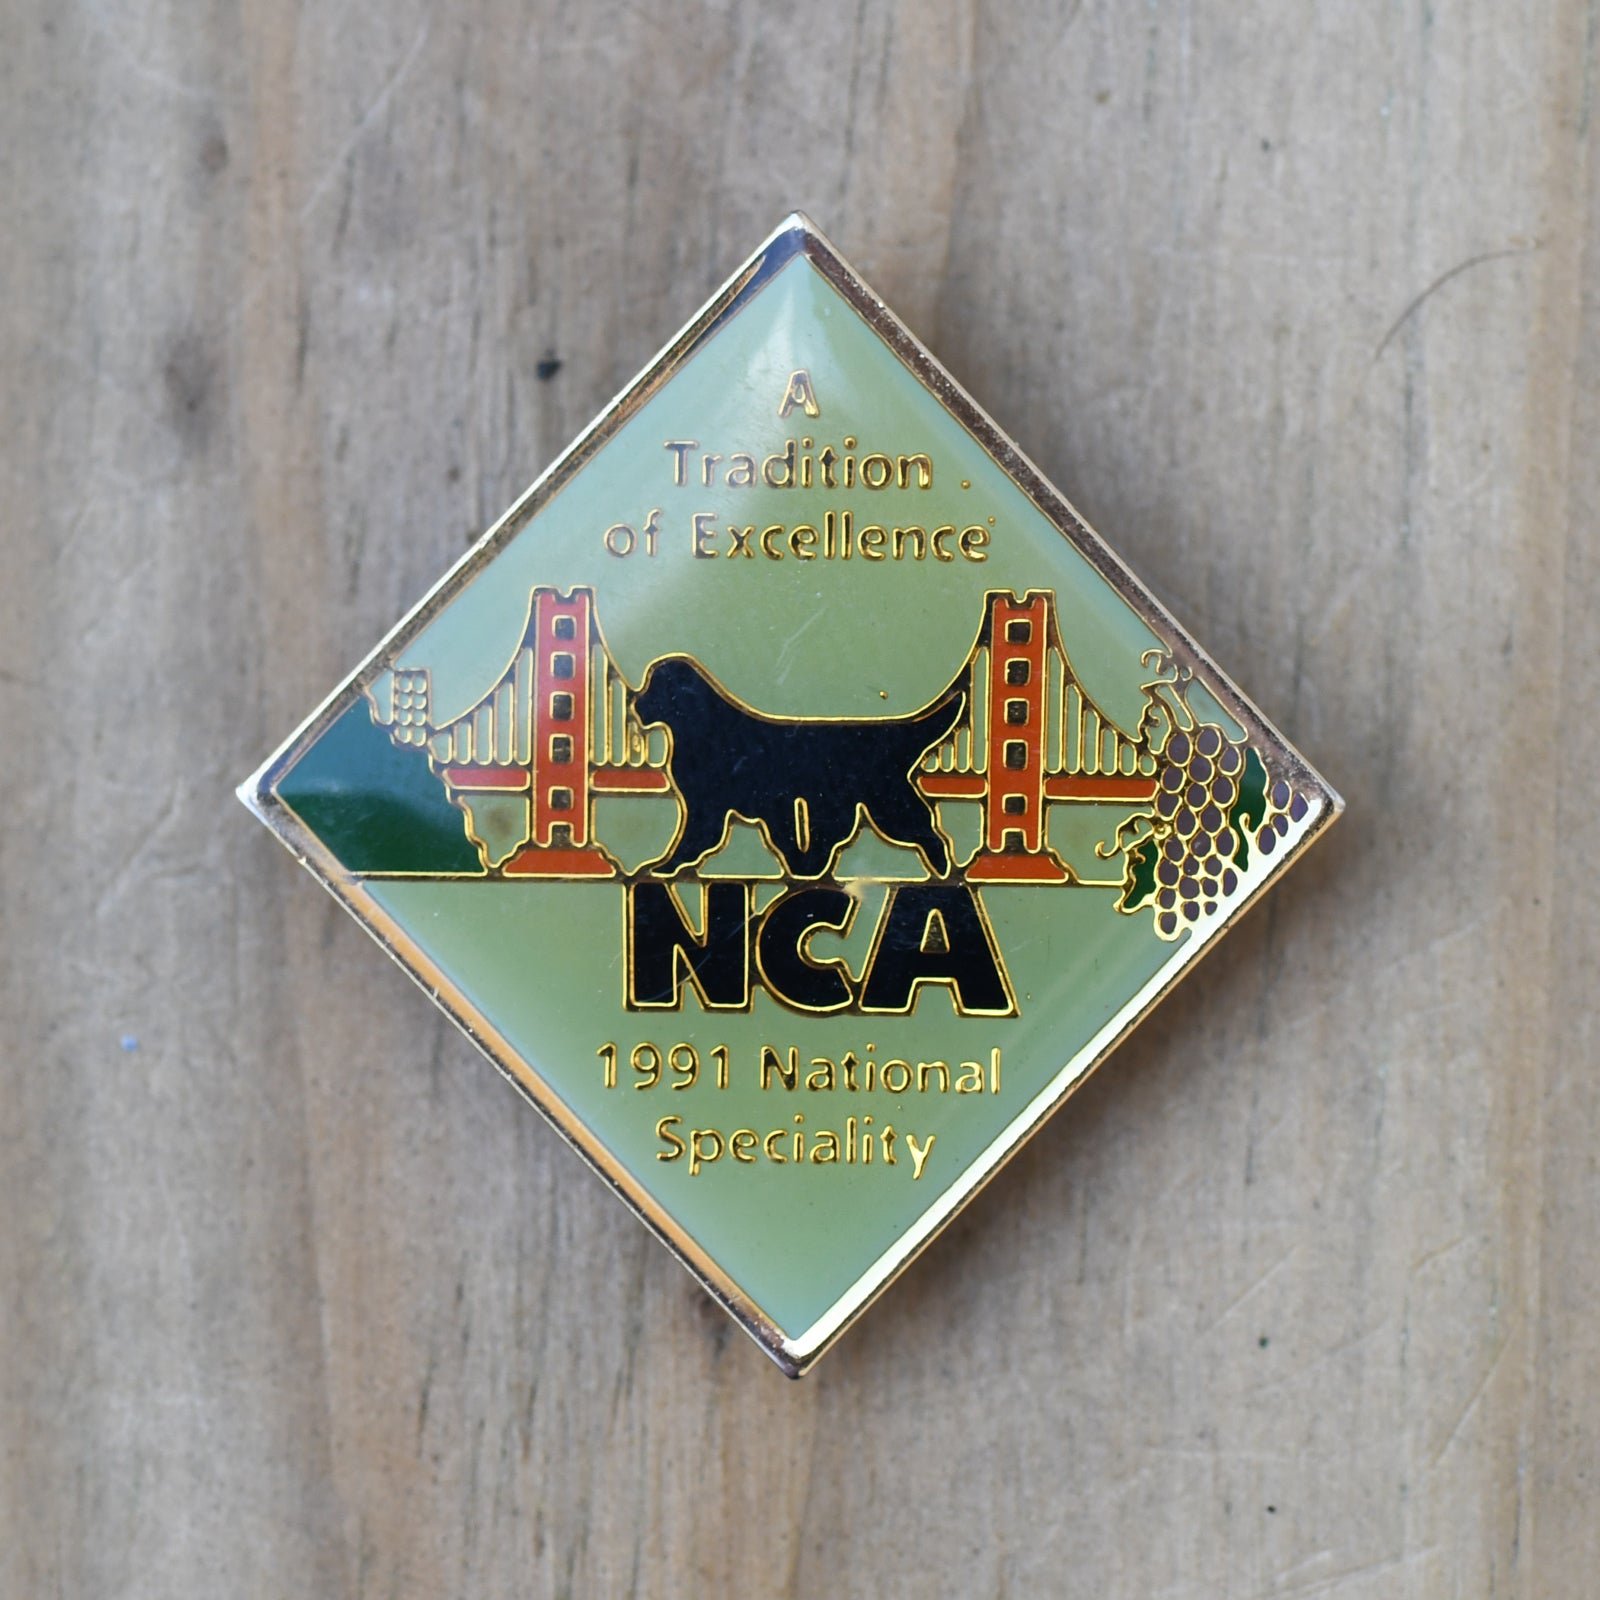 1991 NCA National Specialty pin